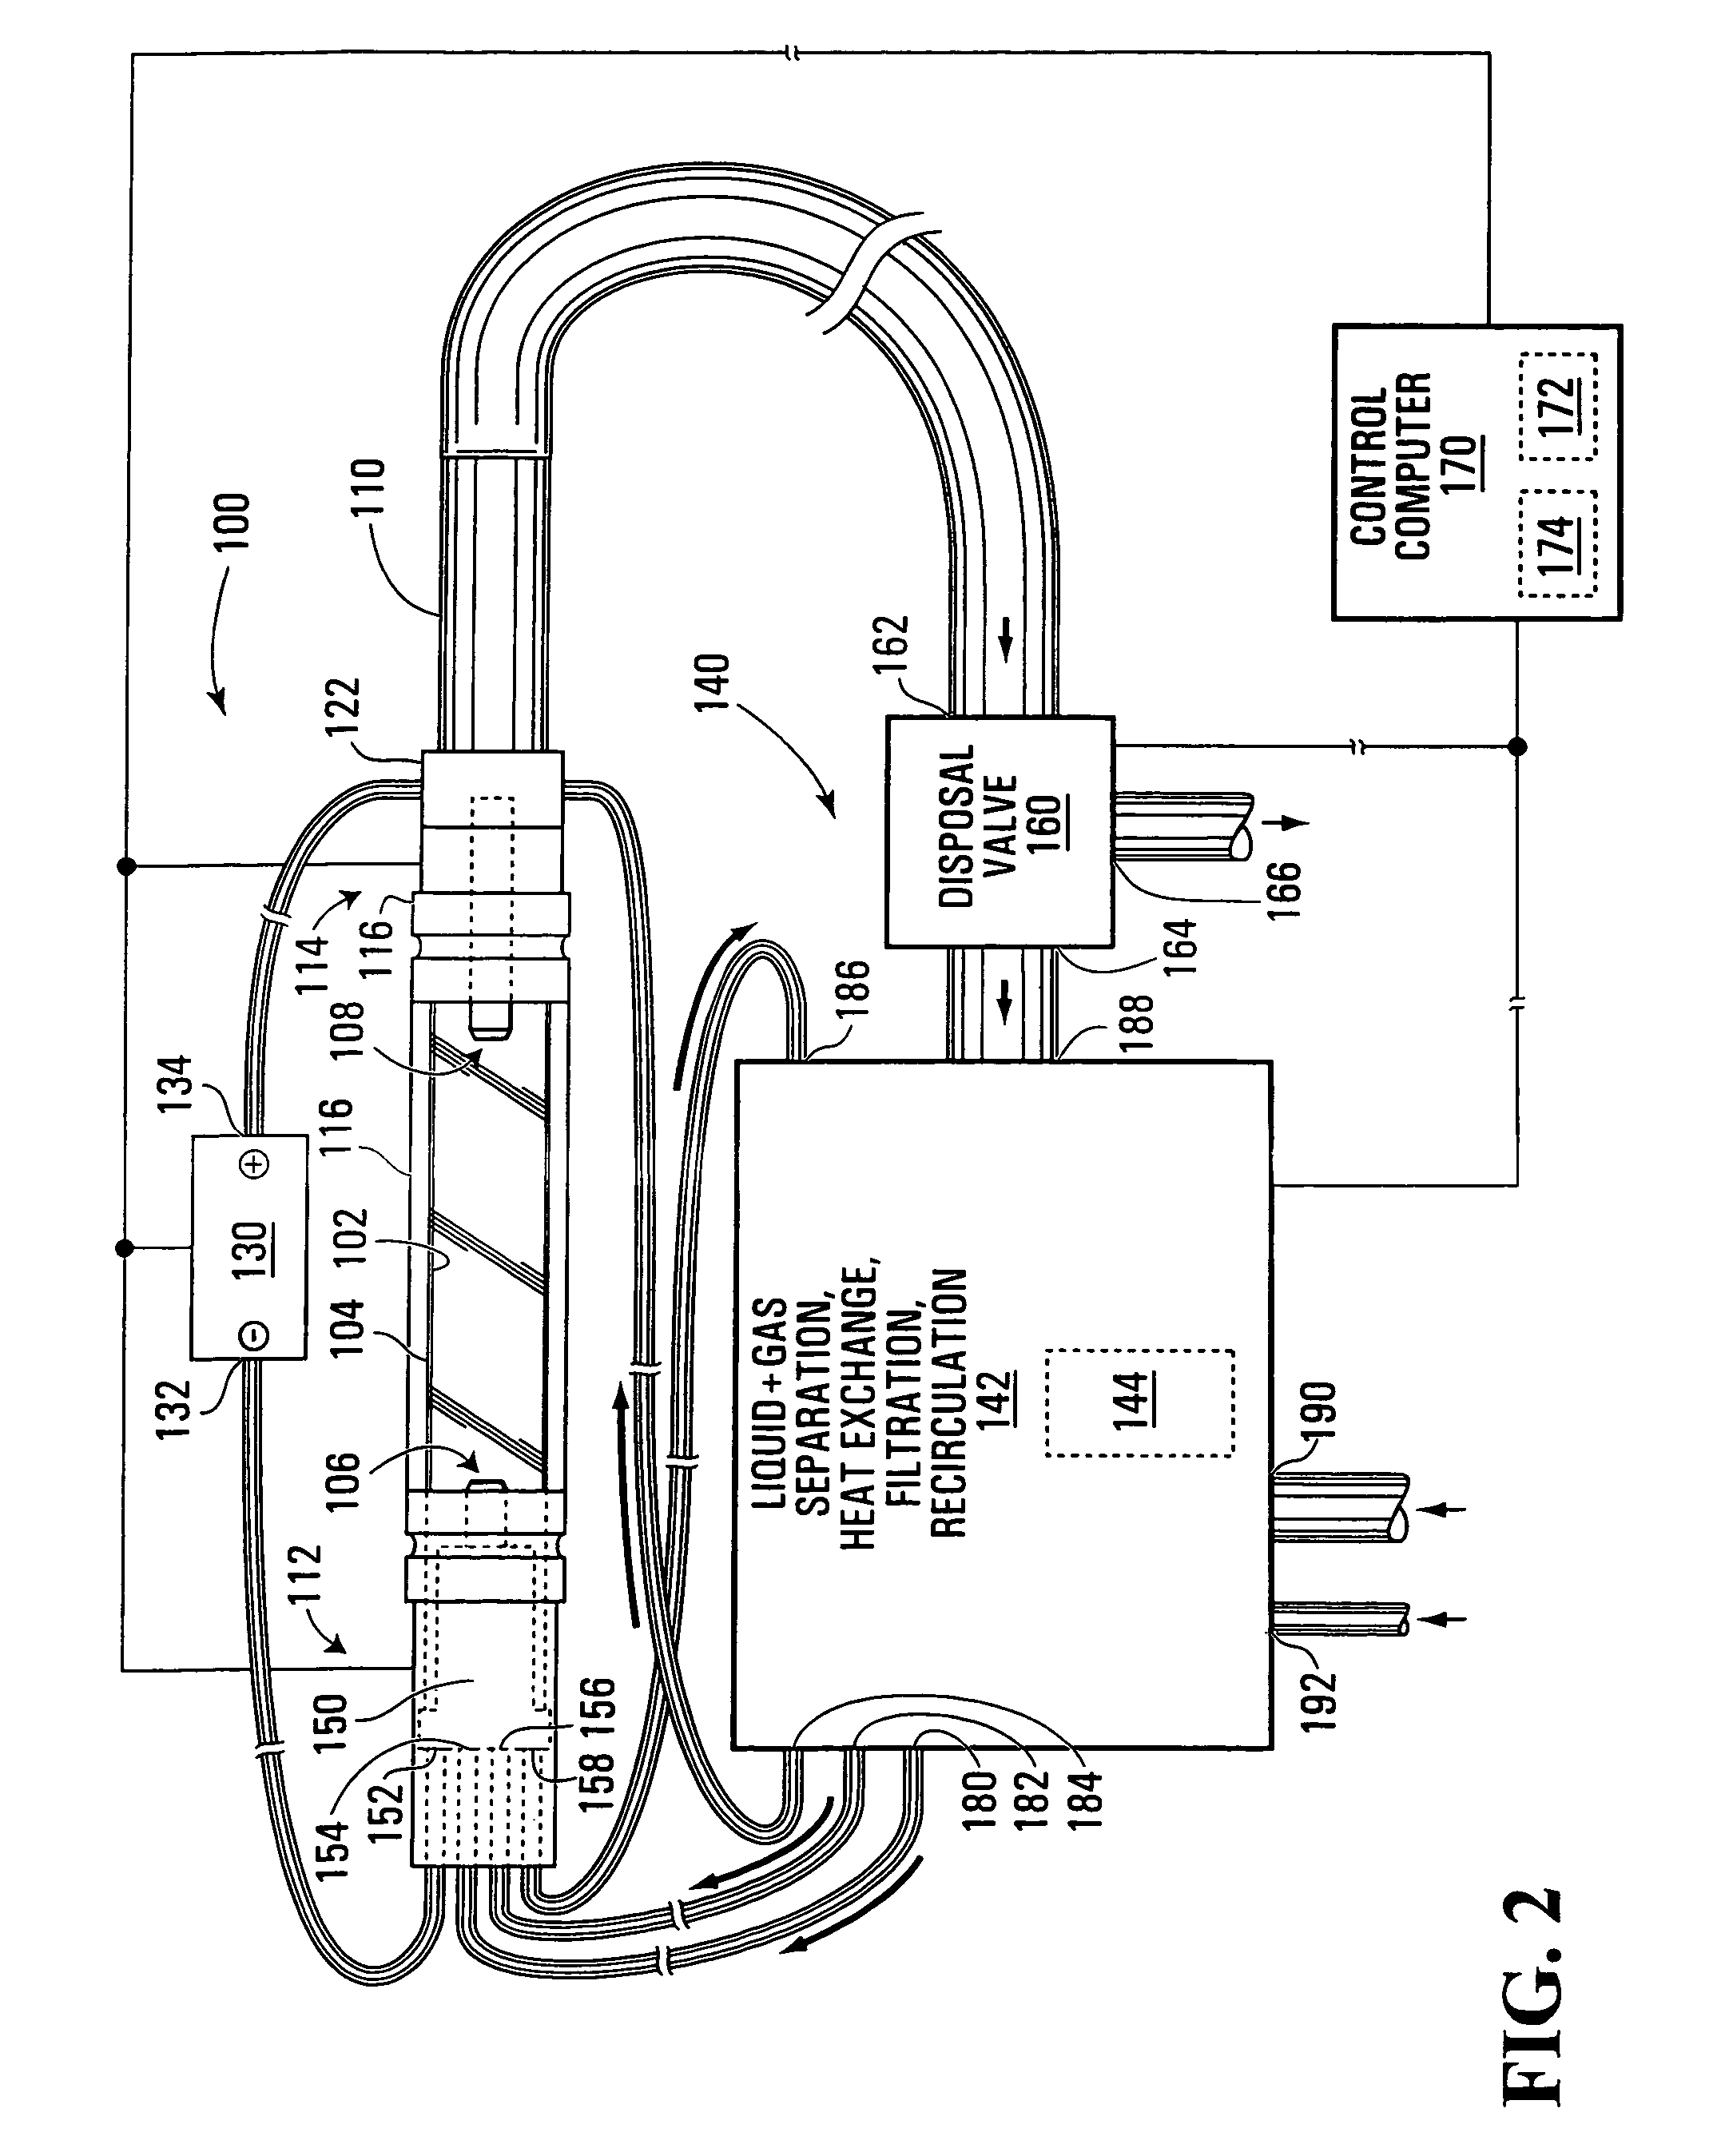 Apparatus and methods for producing electromagnetic radiation